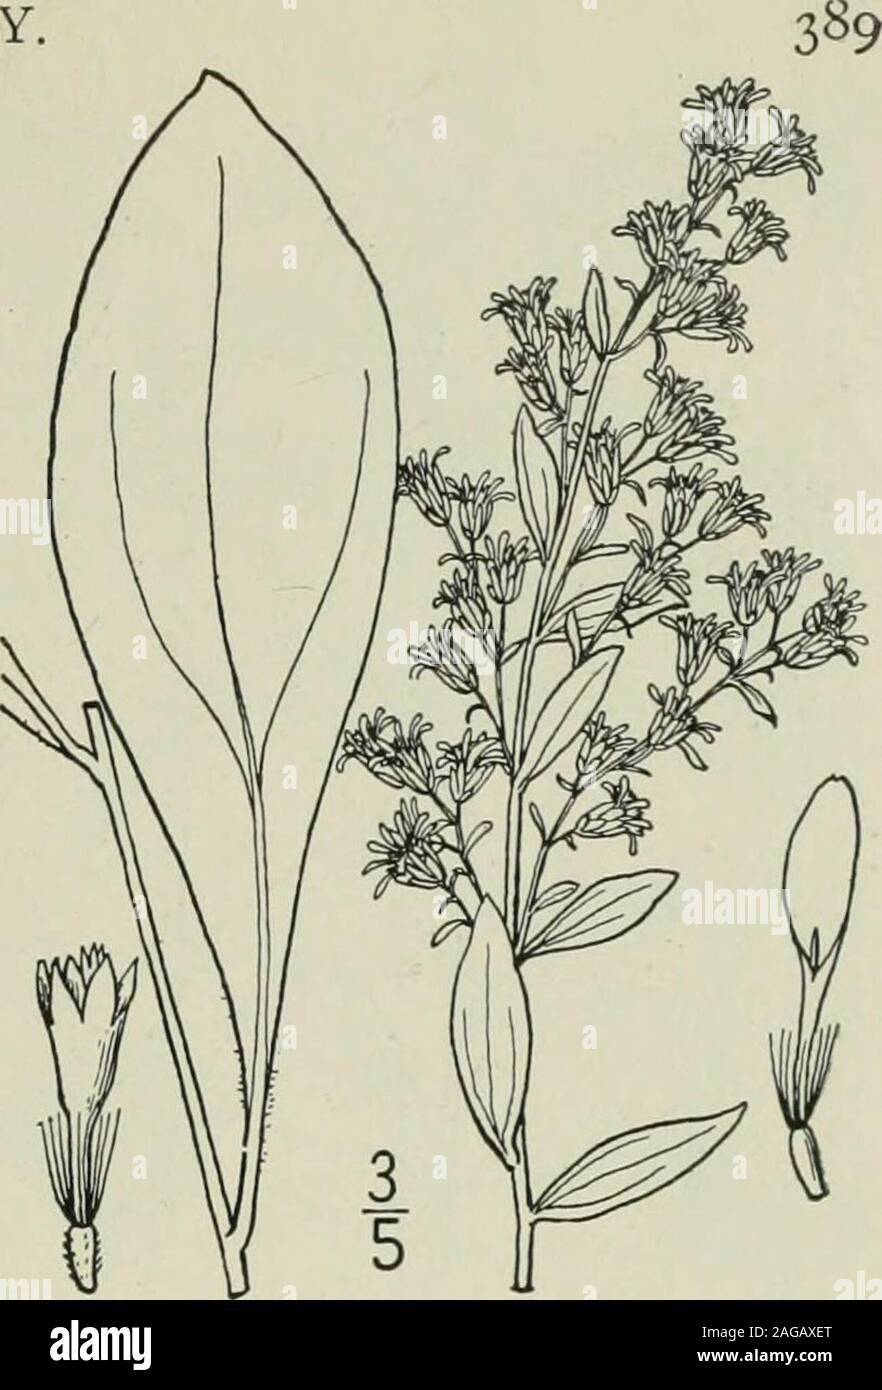 . An illustrated flora of the northern United States, Canada and the British possessions : from Newfoundland to the parallel of the southern boundary of Virginia and from the Atlantic Ocean westward to the 102nd meridian. 23. Solidago sempervirens L. Sea-sideGolden-rod. Fig. 4235. Solidago sempervirens L. Sp. PI. 878. 1753. S. augiistifolia EII. Bot. S. C, & Ga. 2 : 388. 1824. Not Mill. 1768. Stem stout, leafy, usually simple, 2°-8° high,glabrous or slightly puberulent above. Leavesthick, fleshy, entire, with 2-5 pairs of lateralveins, the lower and basal ones oblong, spatu-late or lanceolate, Stock Photo